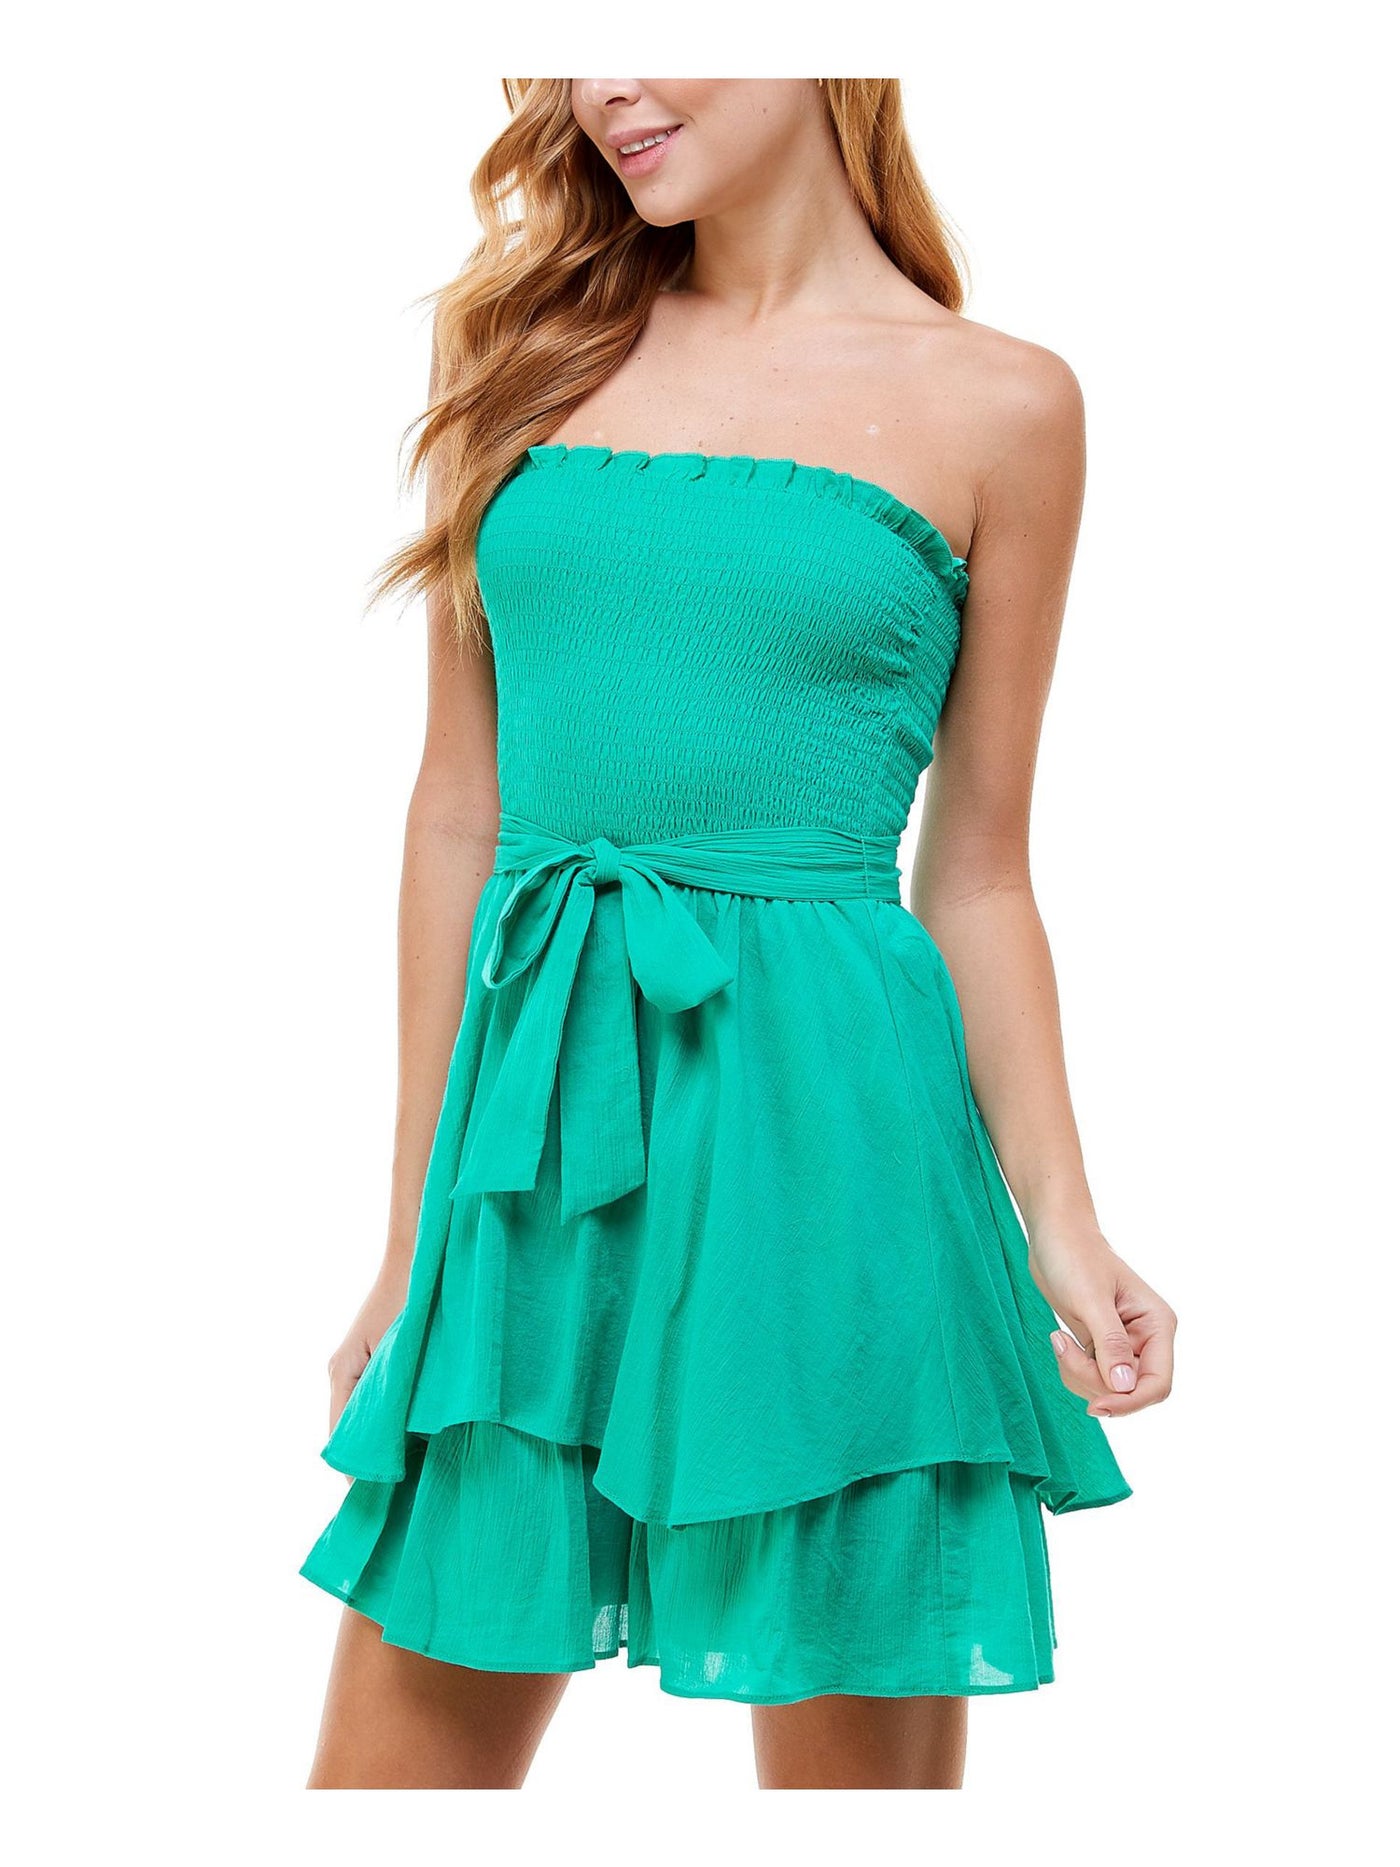 CITY STUDIO Womens Green Ruffled Tie Smocked Strapless Short Party Fit + Flare Dress Juniors XL